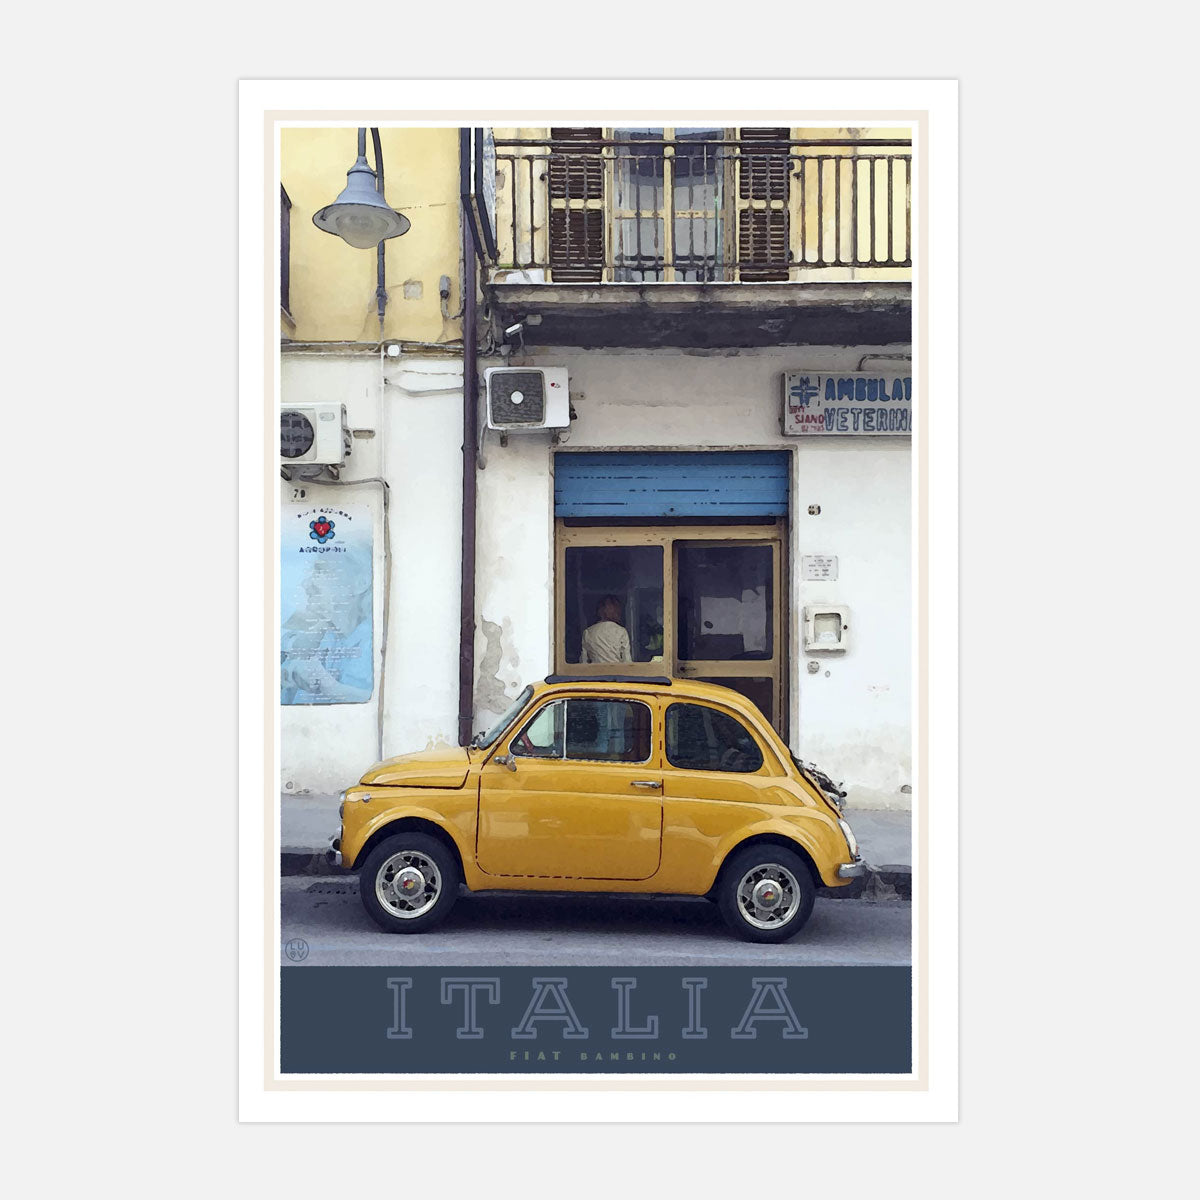 Italy travel style poster - places we luv